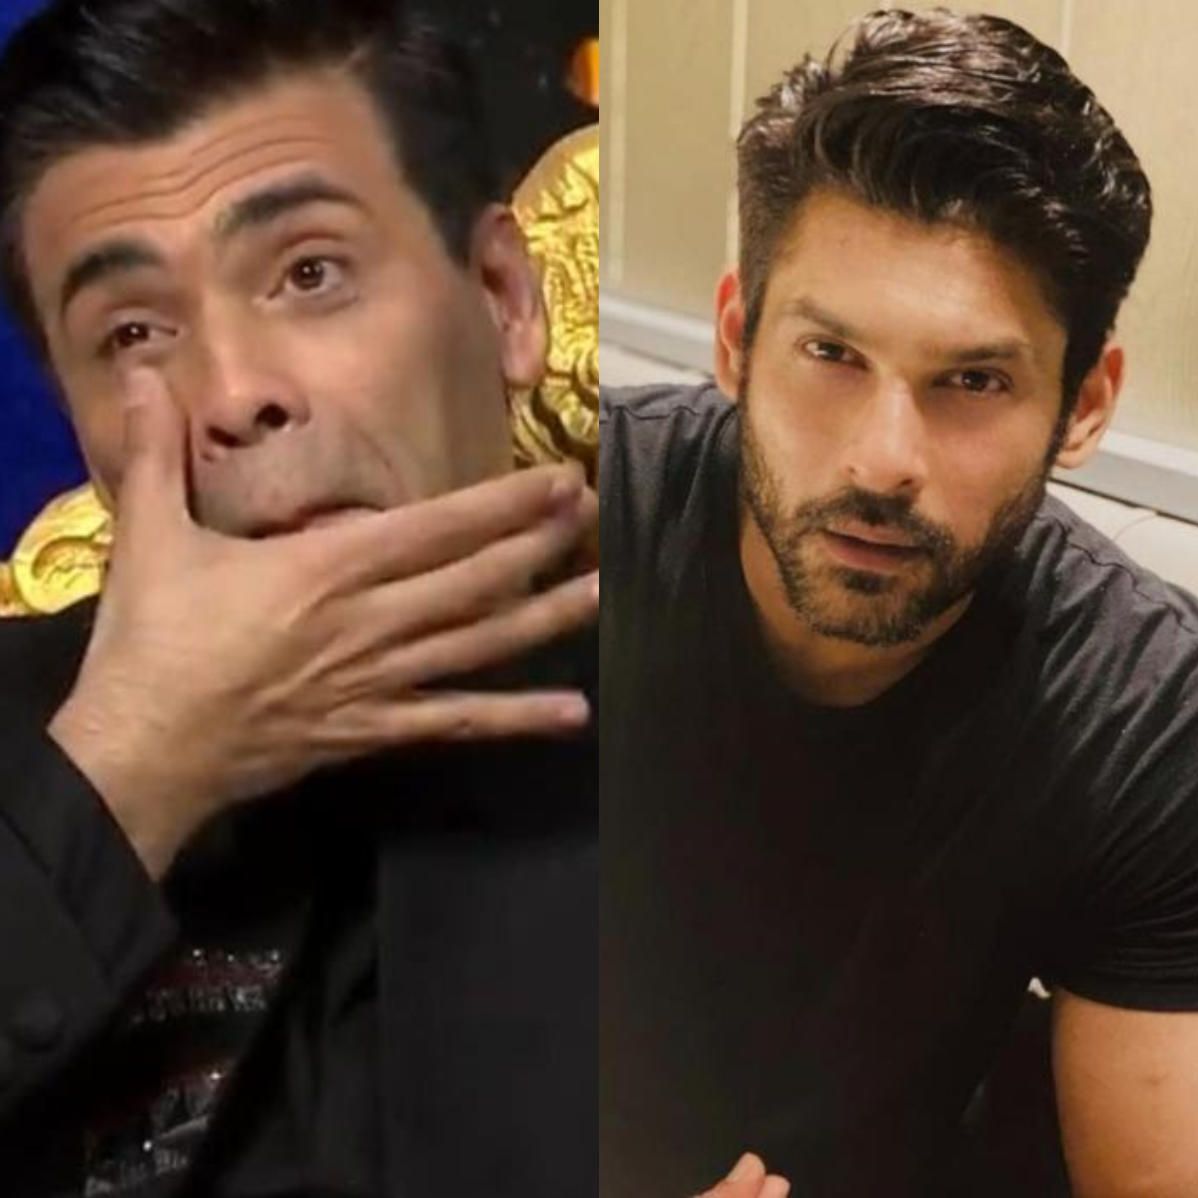 Sidharth Shukla's demise: Karan Johar chokes while remembering the late actor, says 'I'm numb, I can't even breathe'